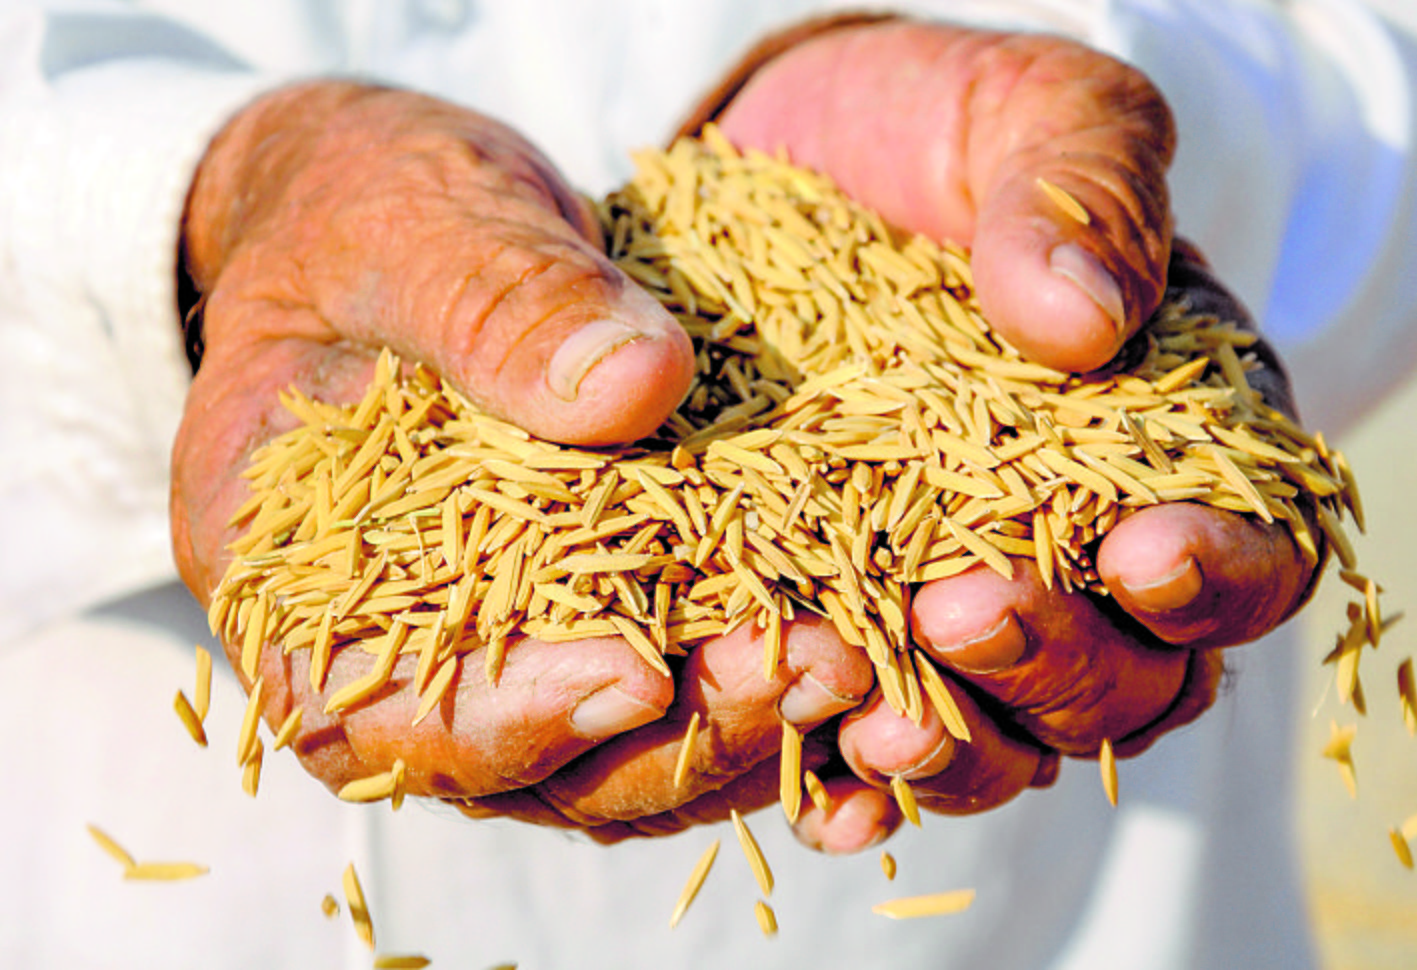 Fixing MSP for kharif crops a challenge for Centre